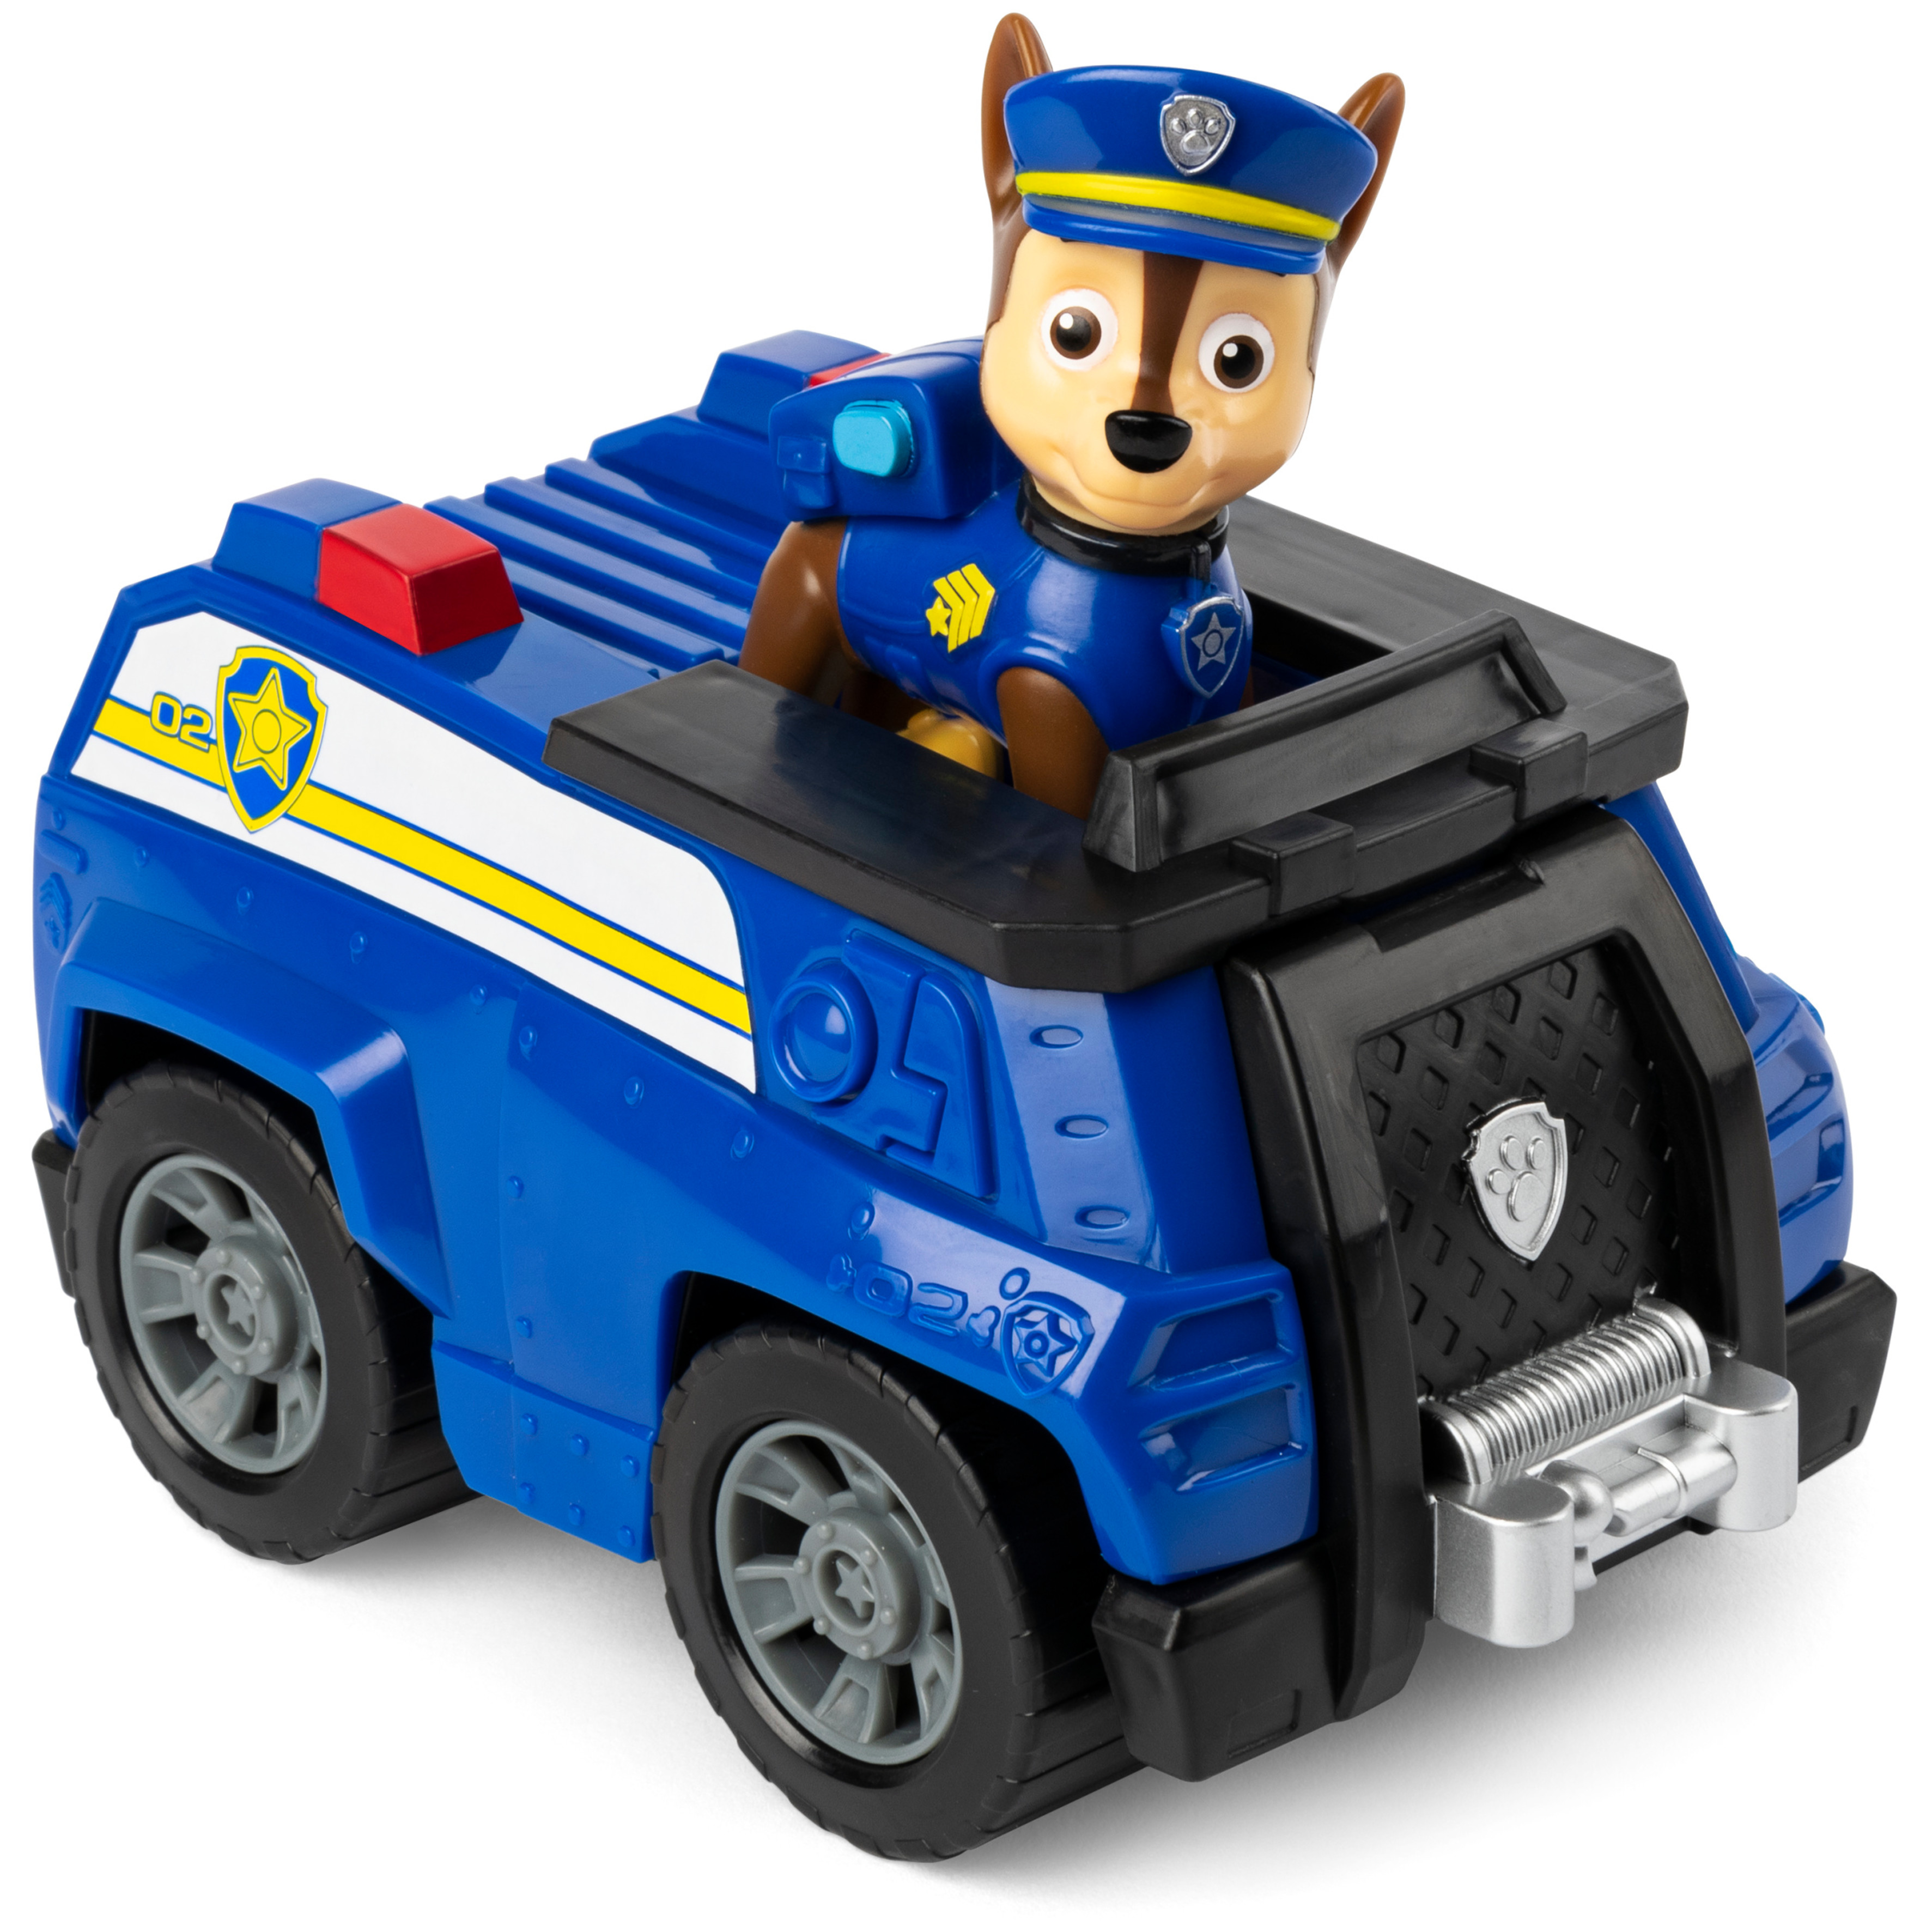 PAW Patrol, Chase’s Patrol Cruiser Vehicle with Collectible Figure - image 4 of 5